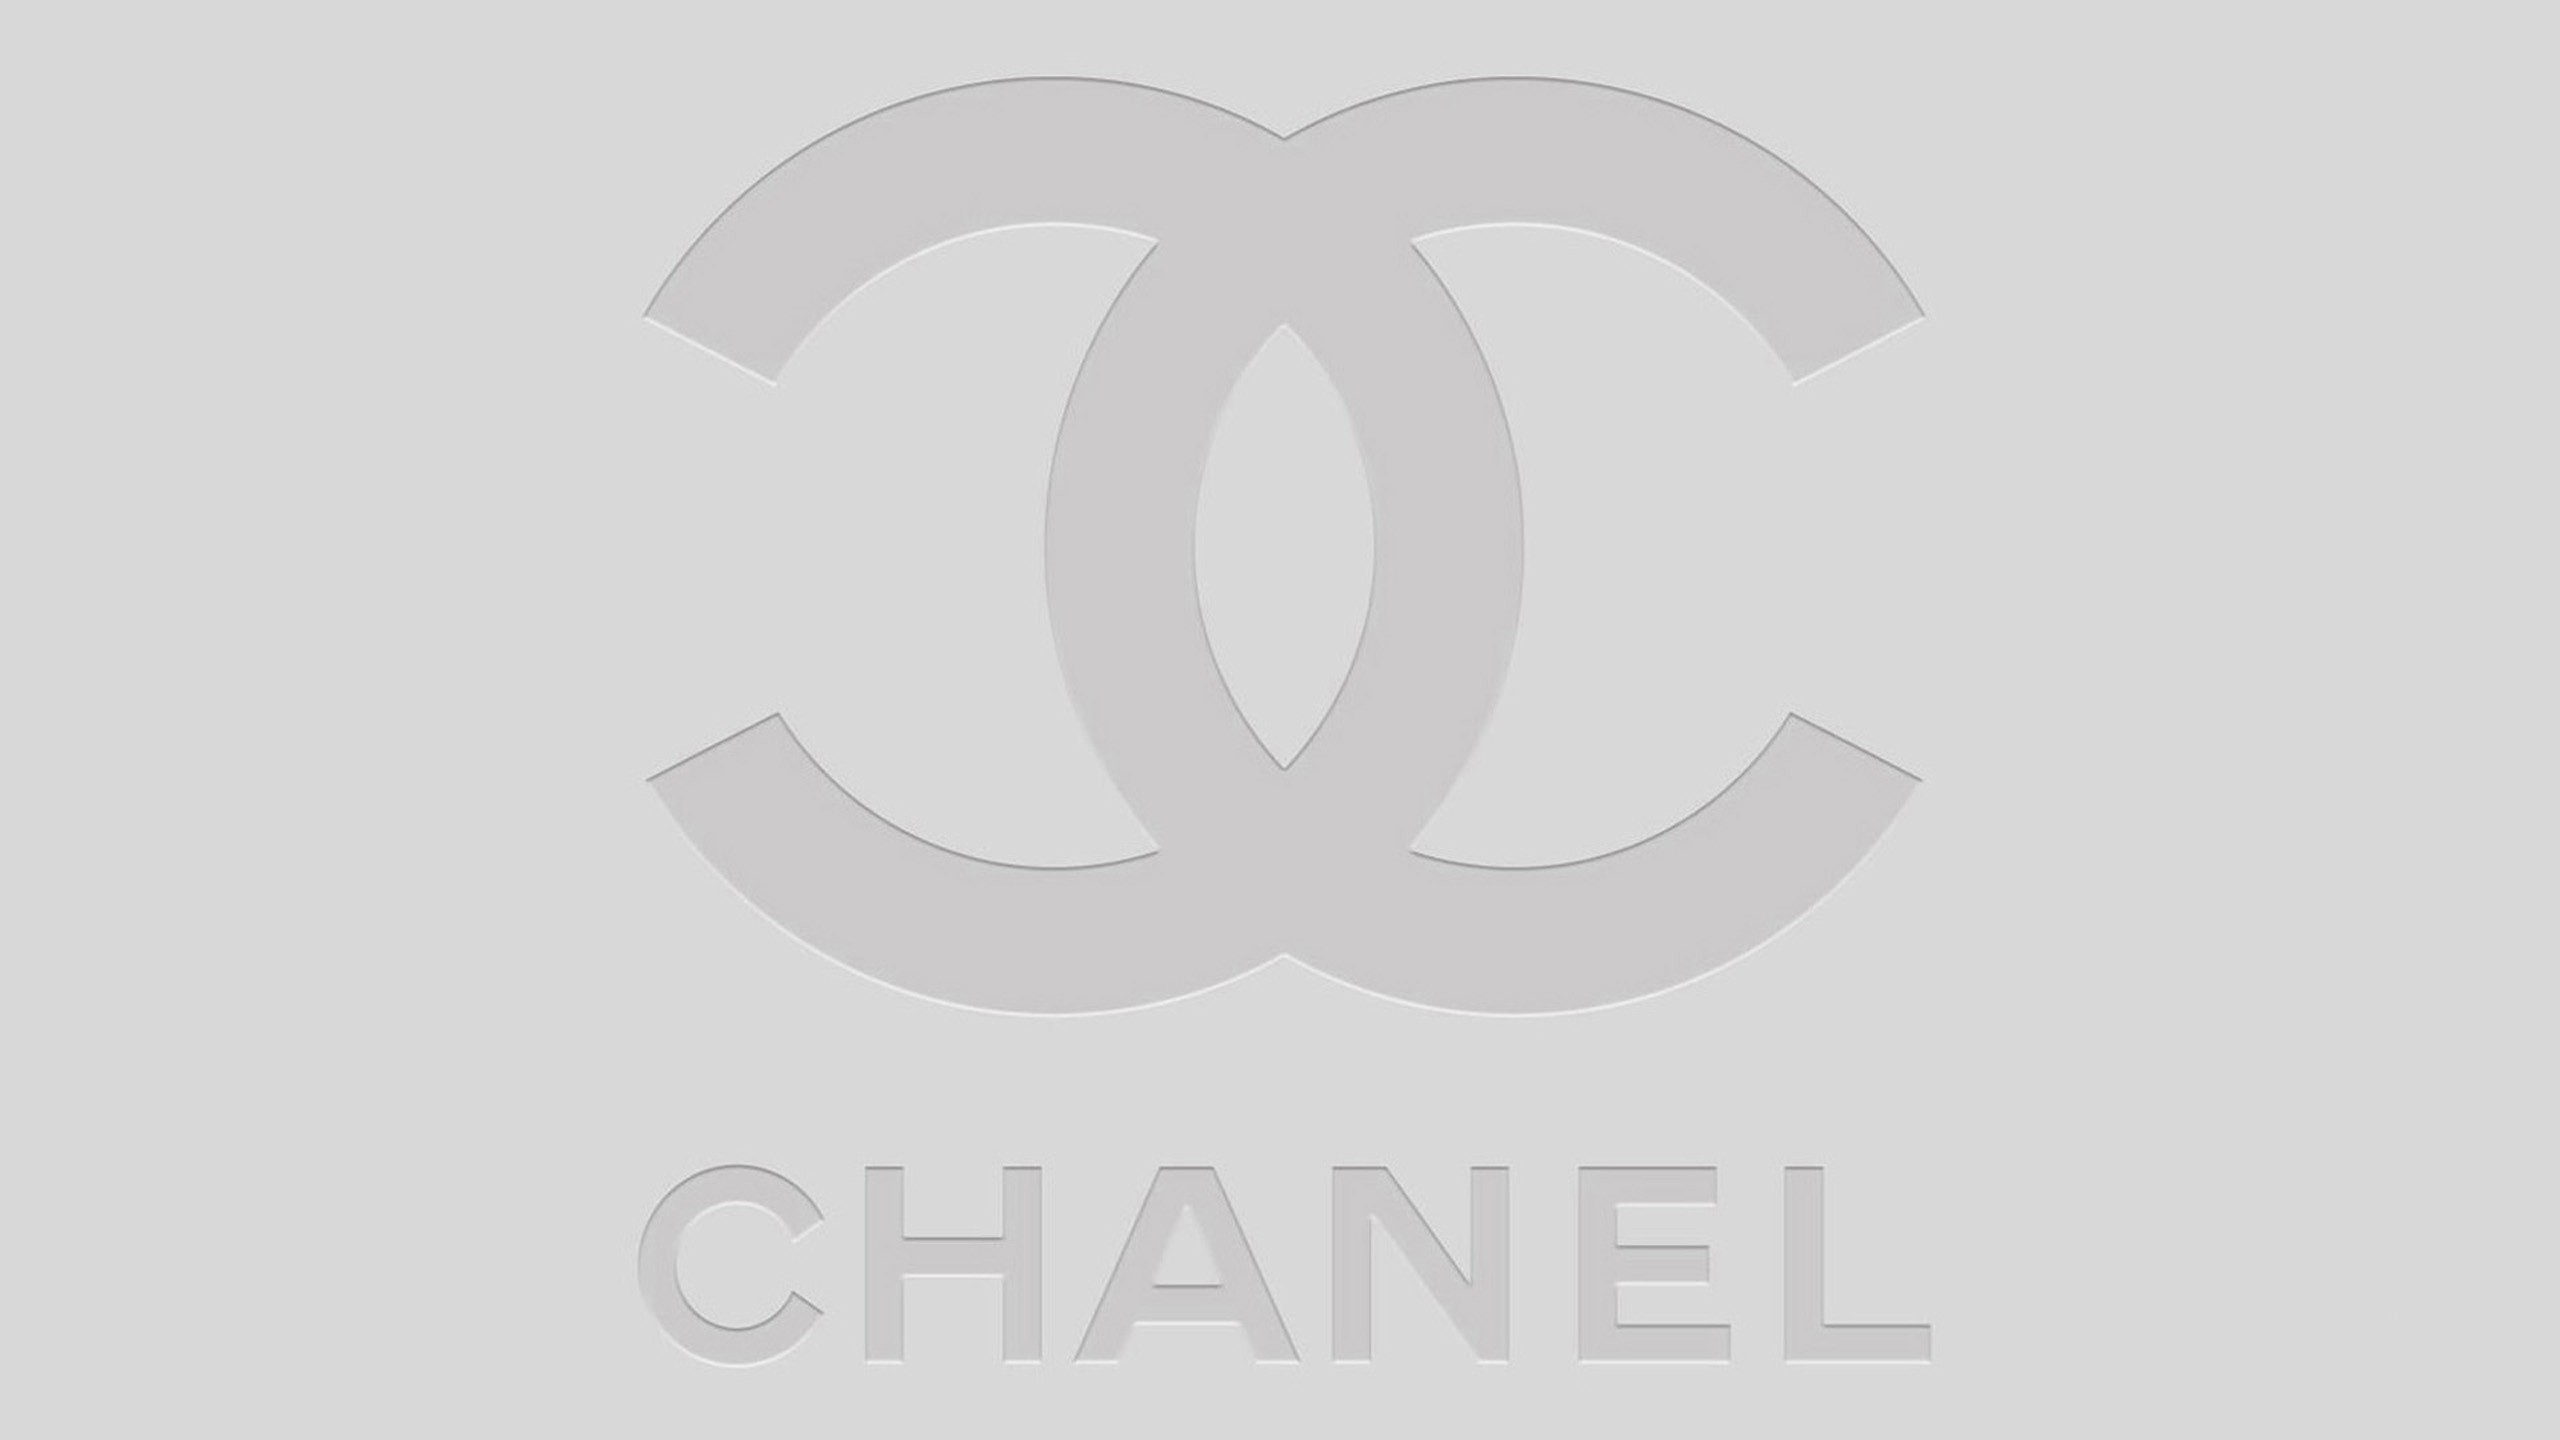 Chanel Wallpaper For Iphone 62 Images